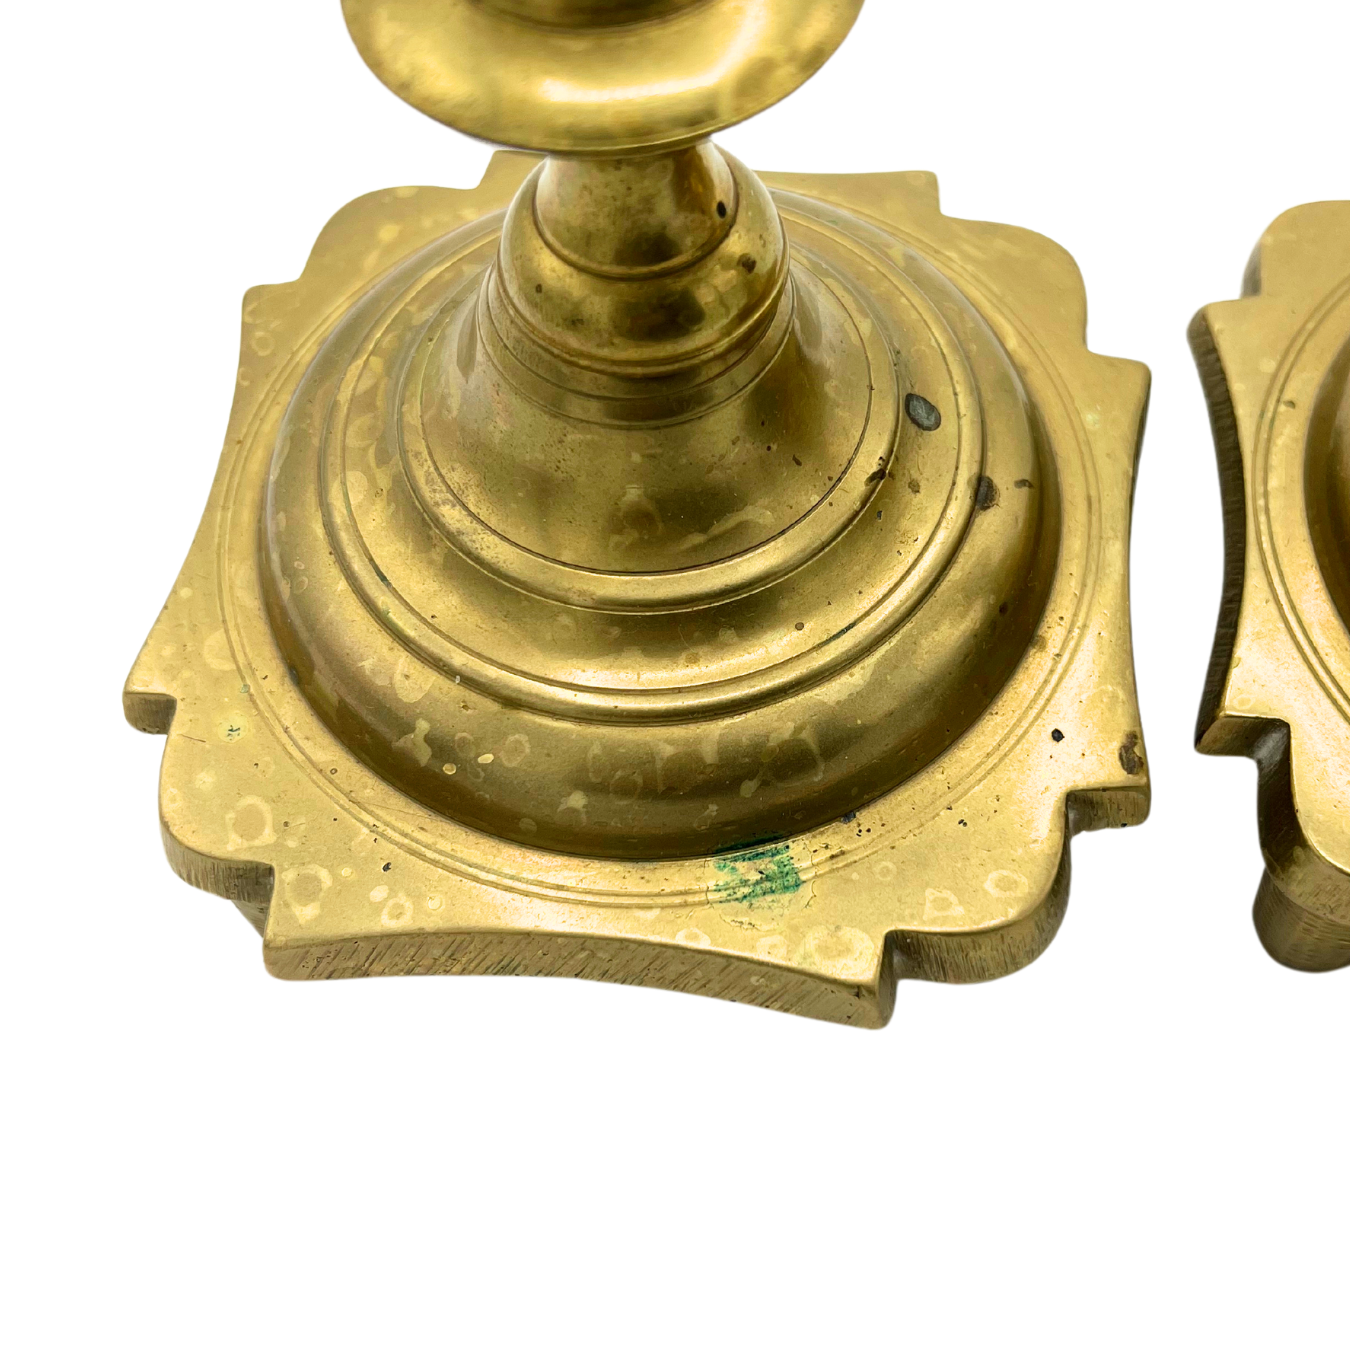 pair of vintage solid brass candlesticks